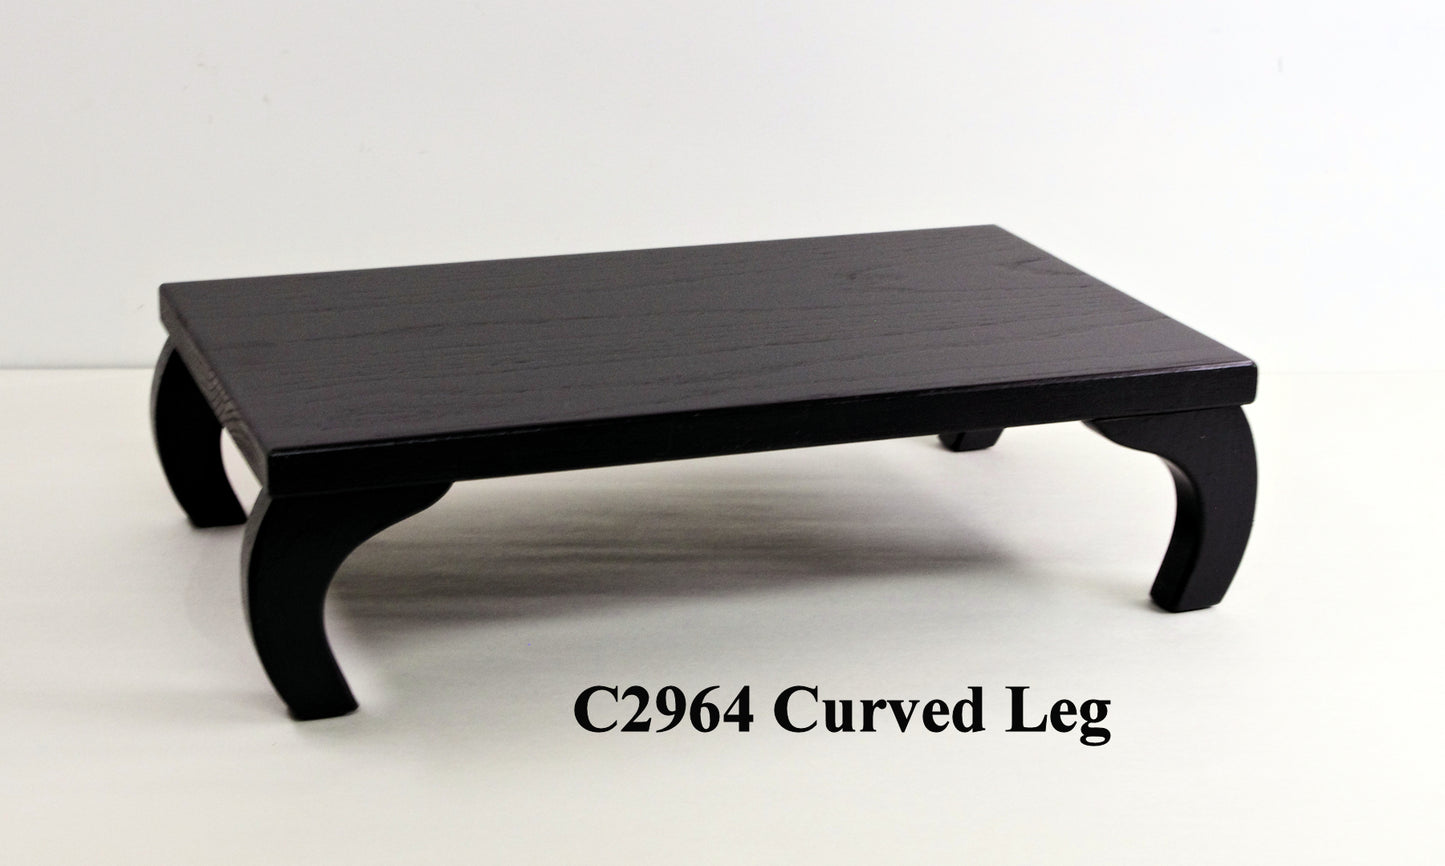 Bonsai Stand Curved Leg C2964 Made to Order 33" Length